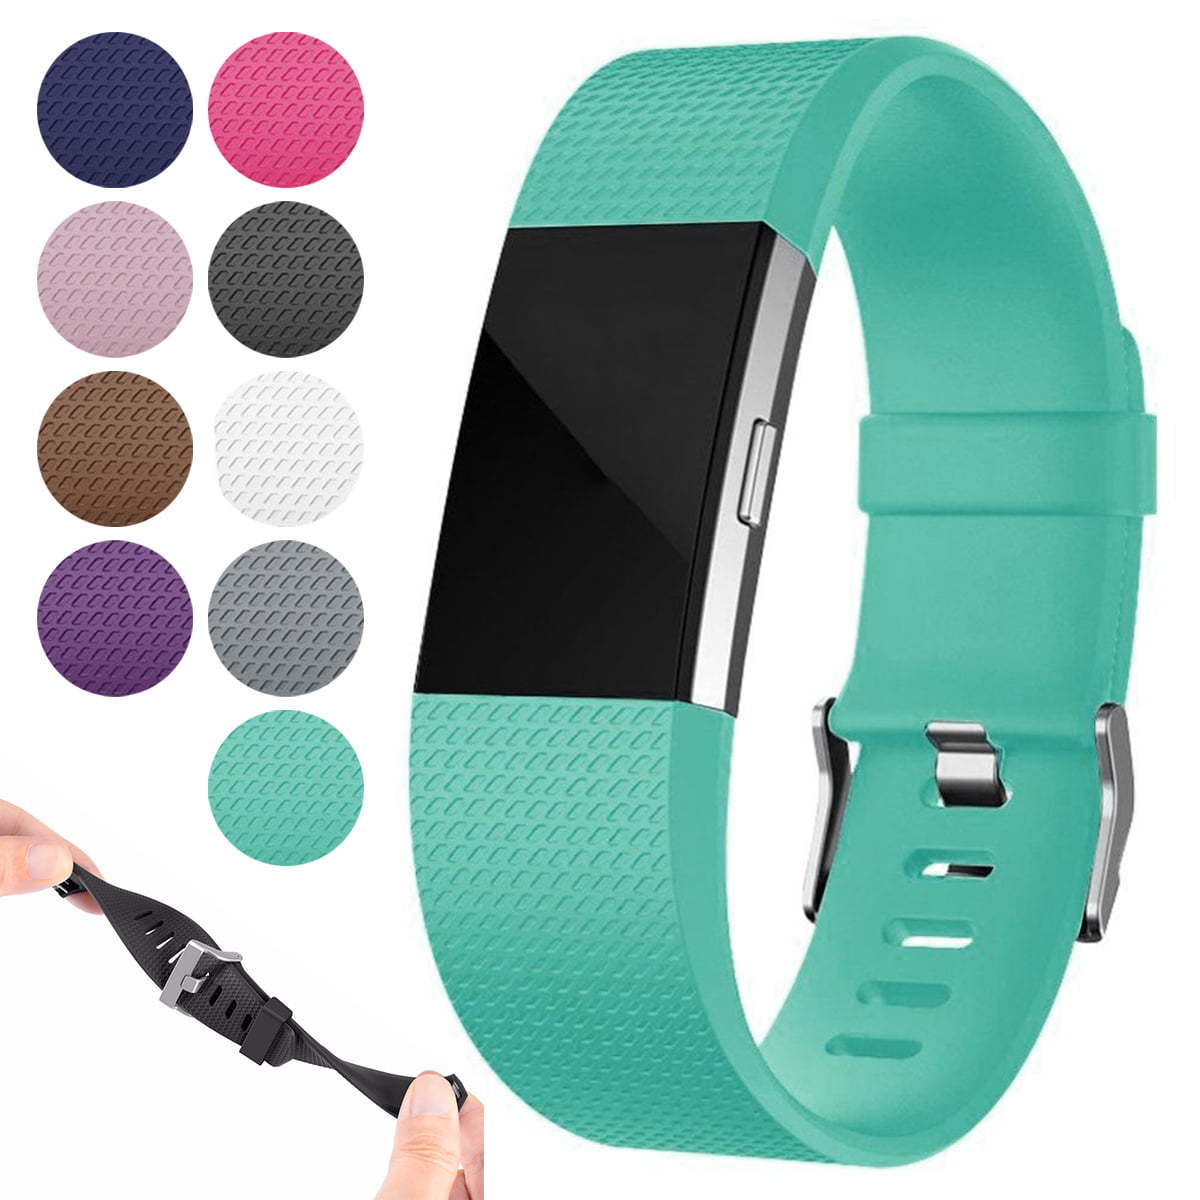 FOR Fitbit CHARGE 2 Replacement Silicone Rubber Band Strap Band Bracelet CA 